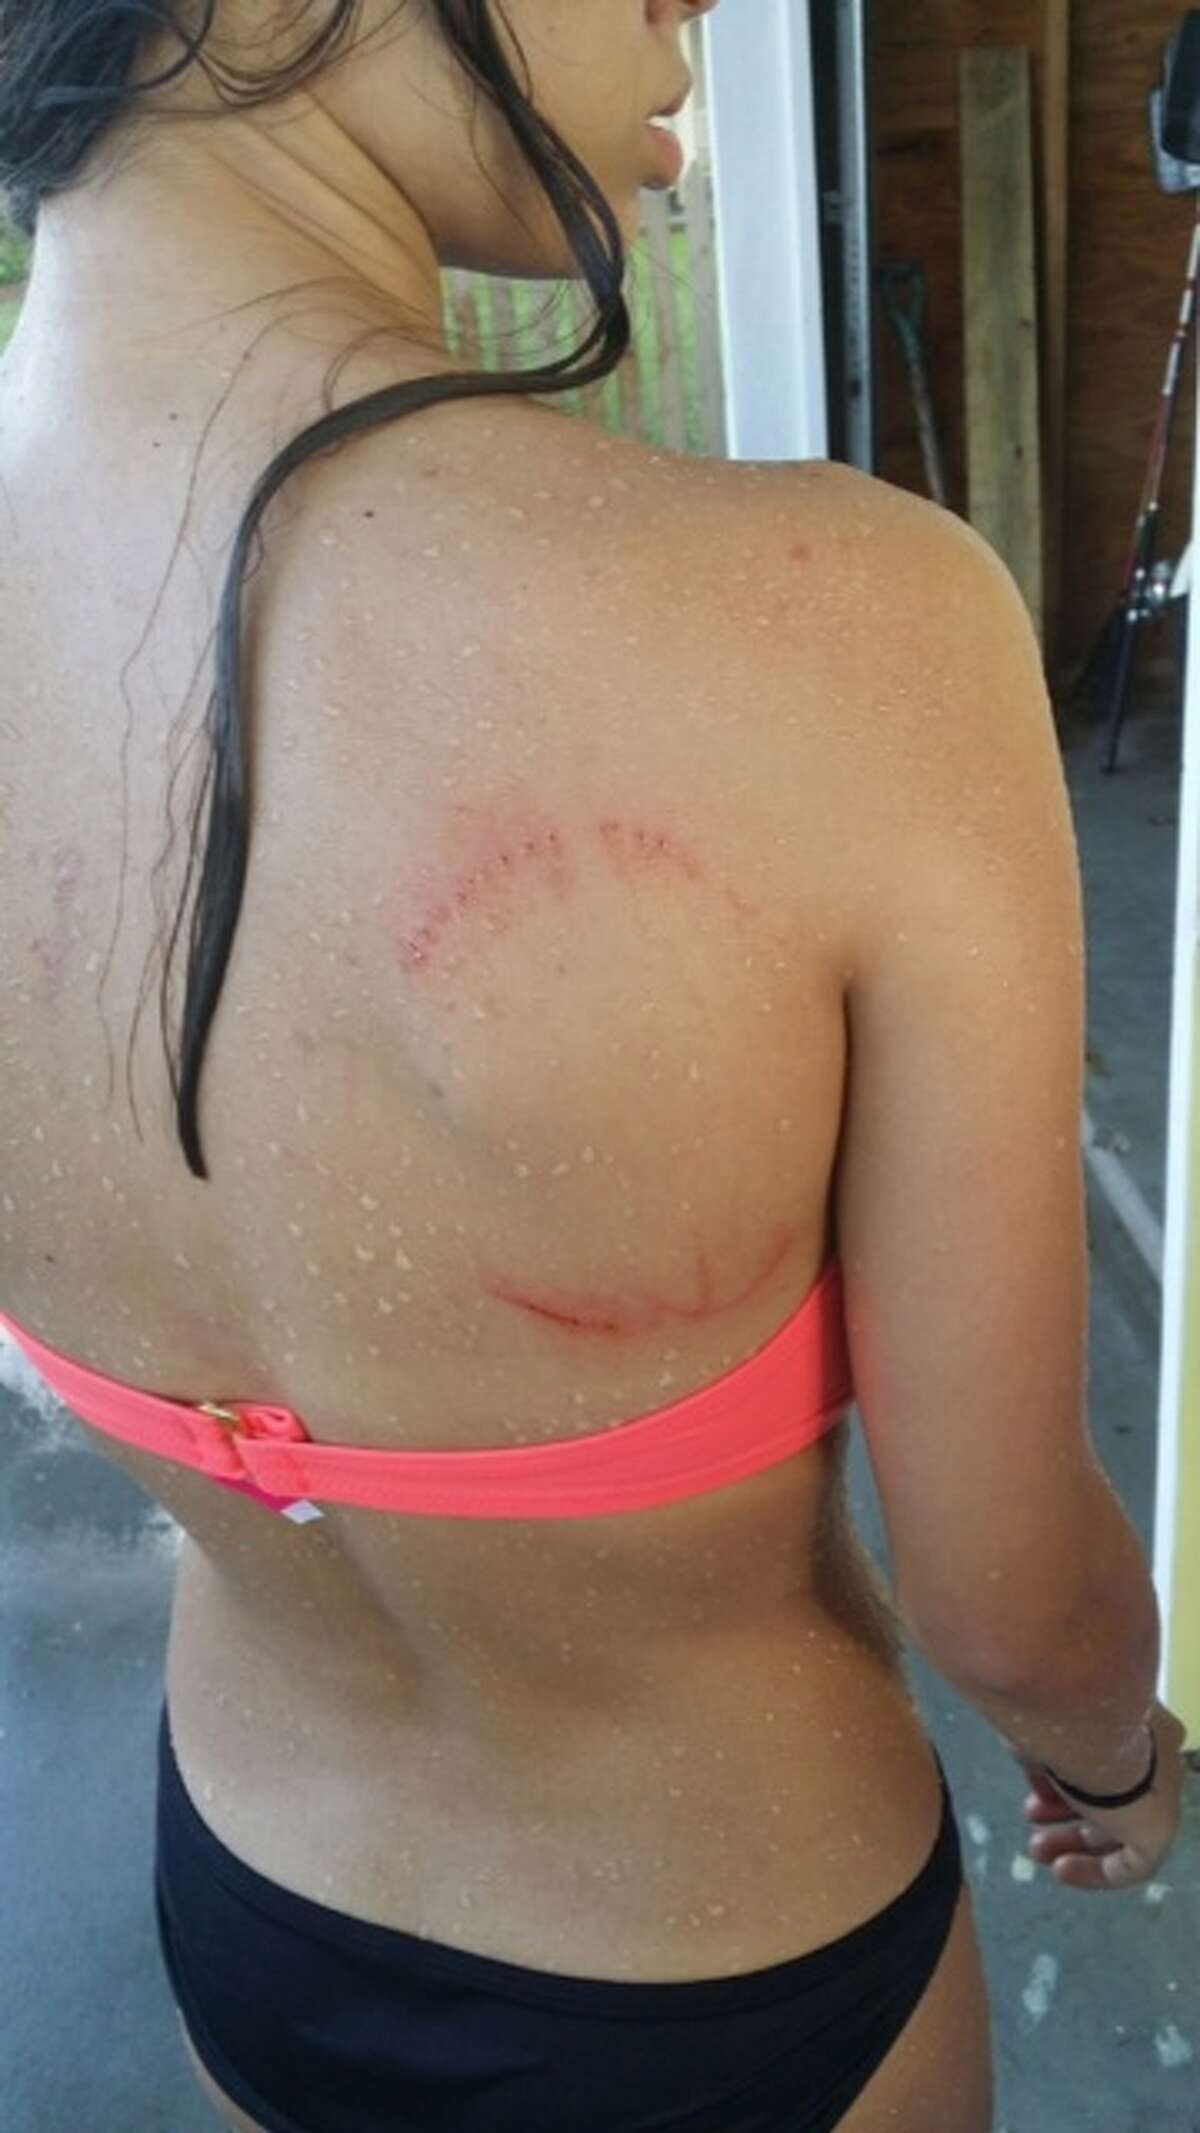 Mikaela Amezaga, 14, was injured after swimming Saturday evening on the west end of Galveston Island. Her family believes this wound came from a shark bite.